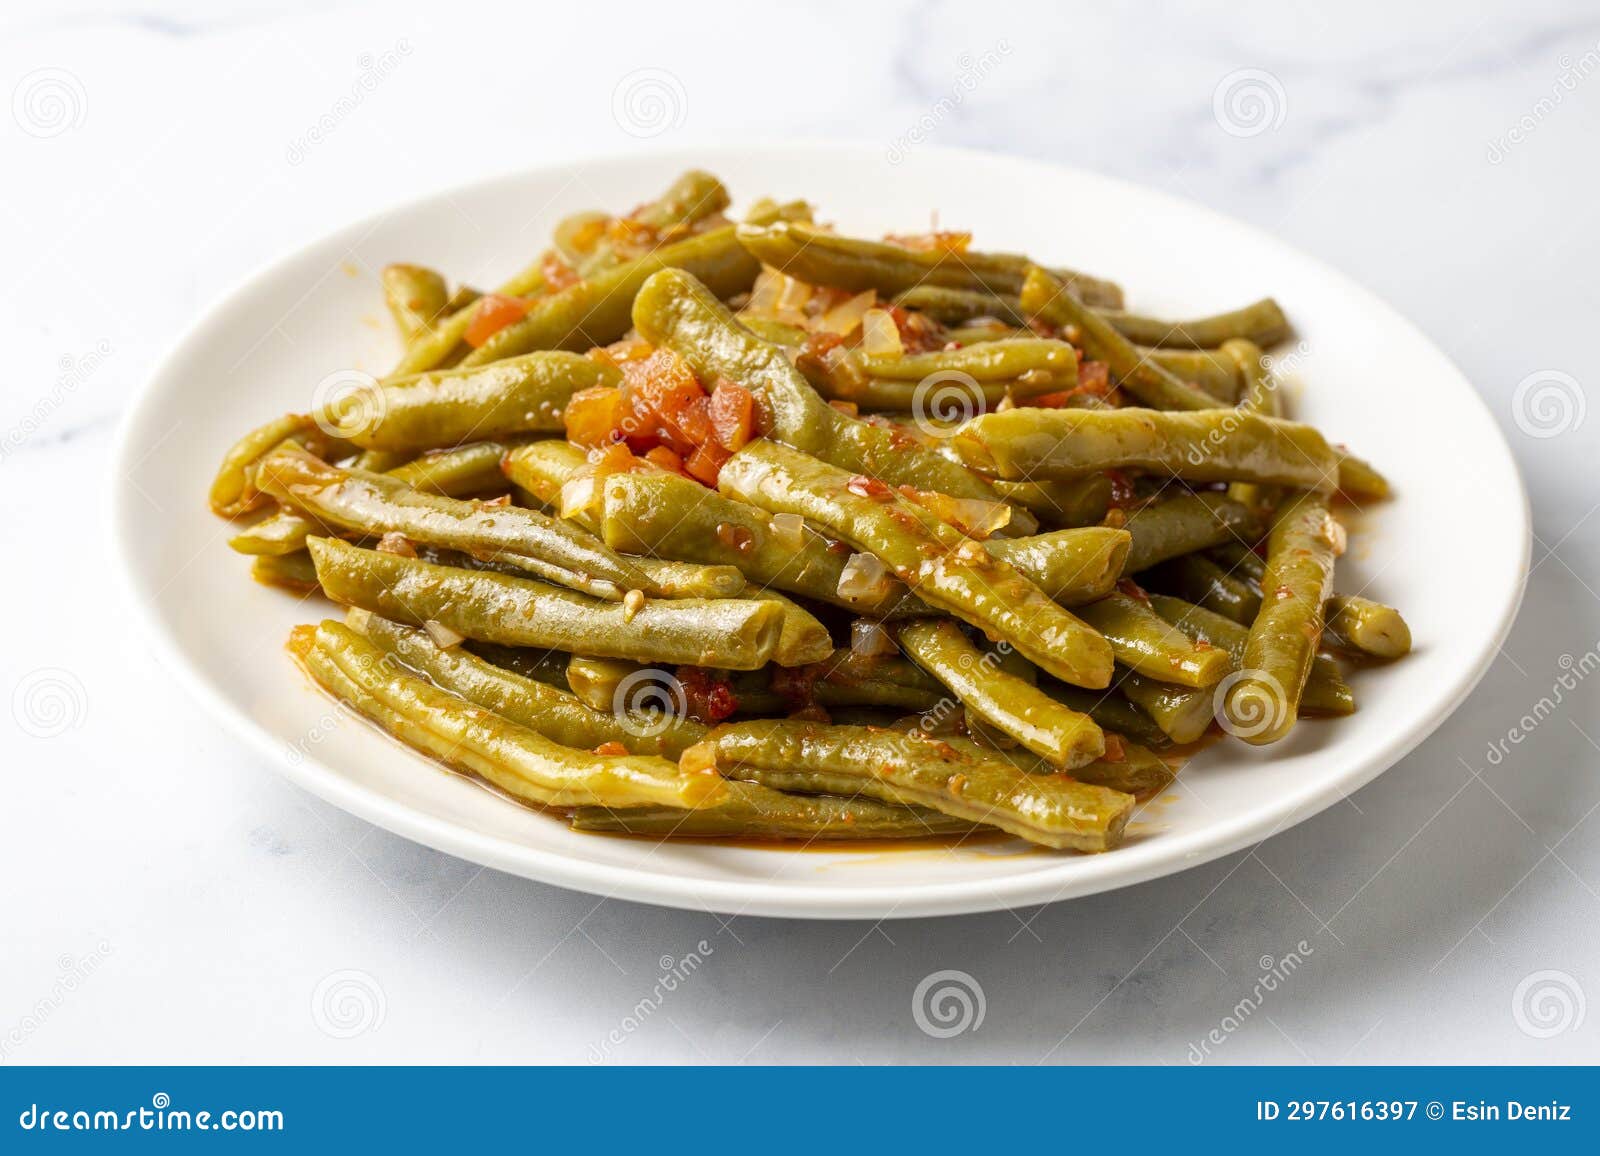 traditional delicious turkish food green beans with olive oil turkish name zeytinyagli taze fasulye